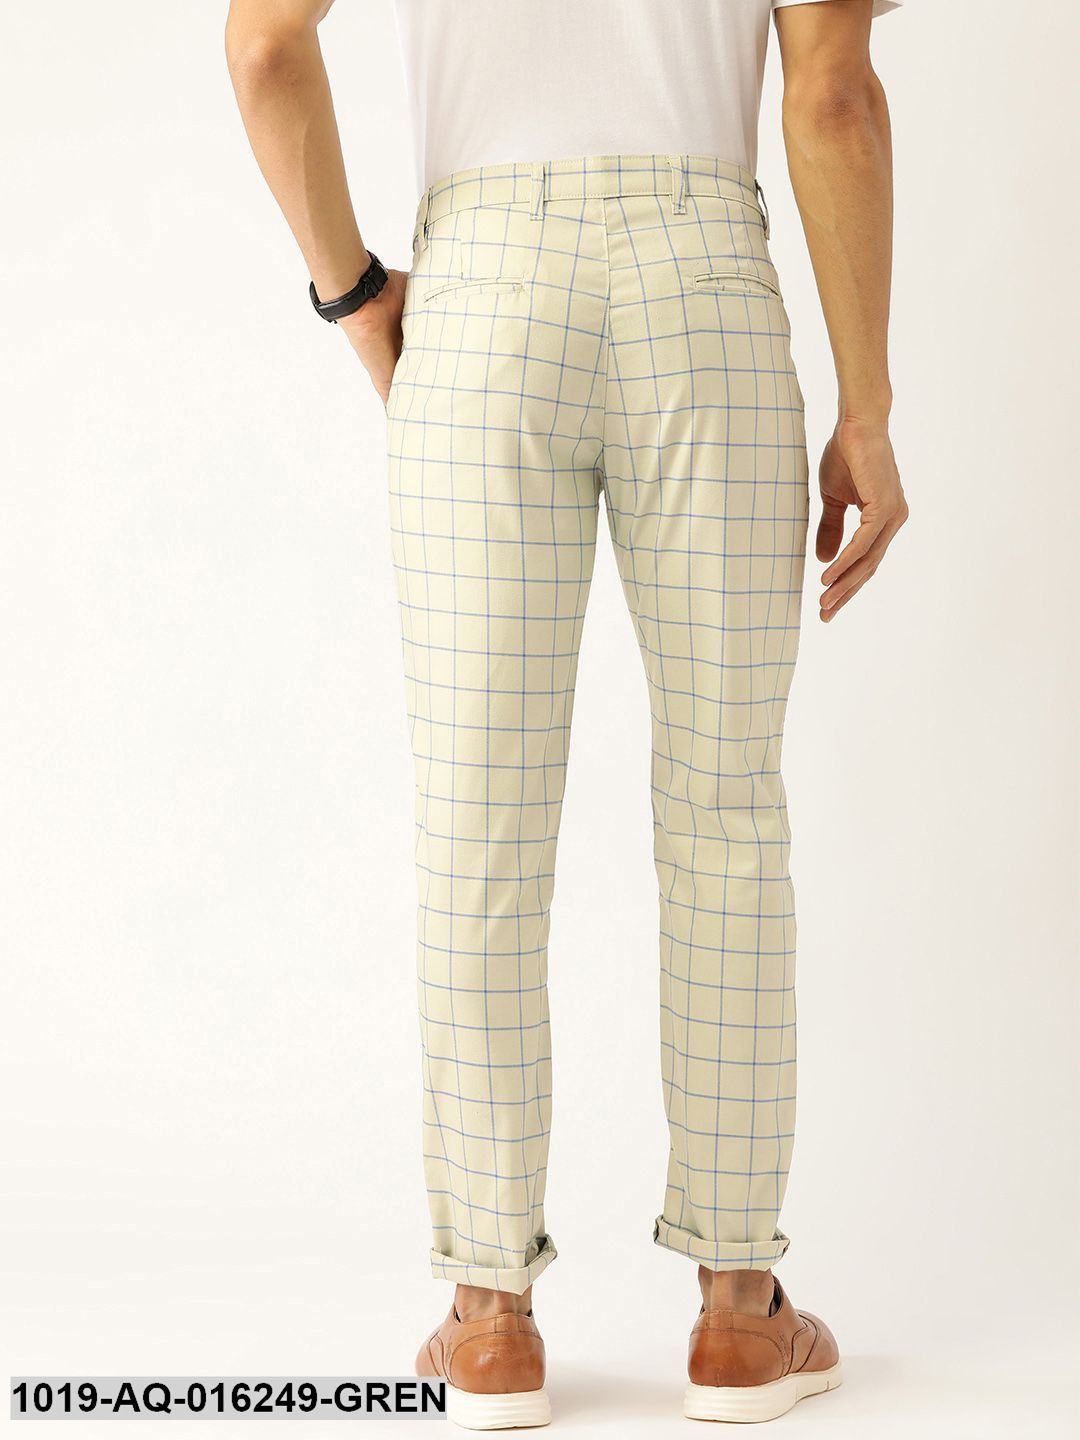 Buy SELECTED Navy & Green Checked Smart Casual Trousers - Trousers for Men  977390 | Myntra